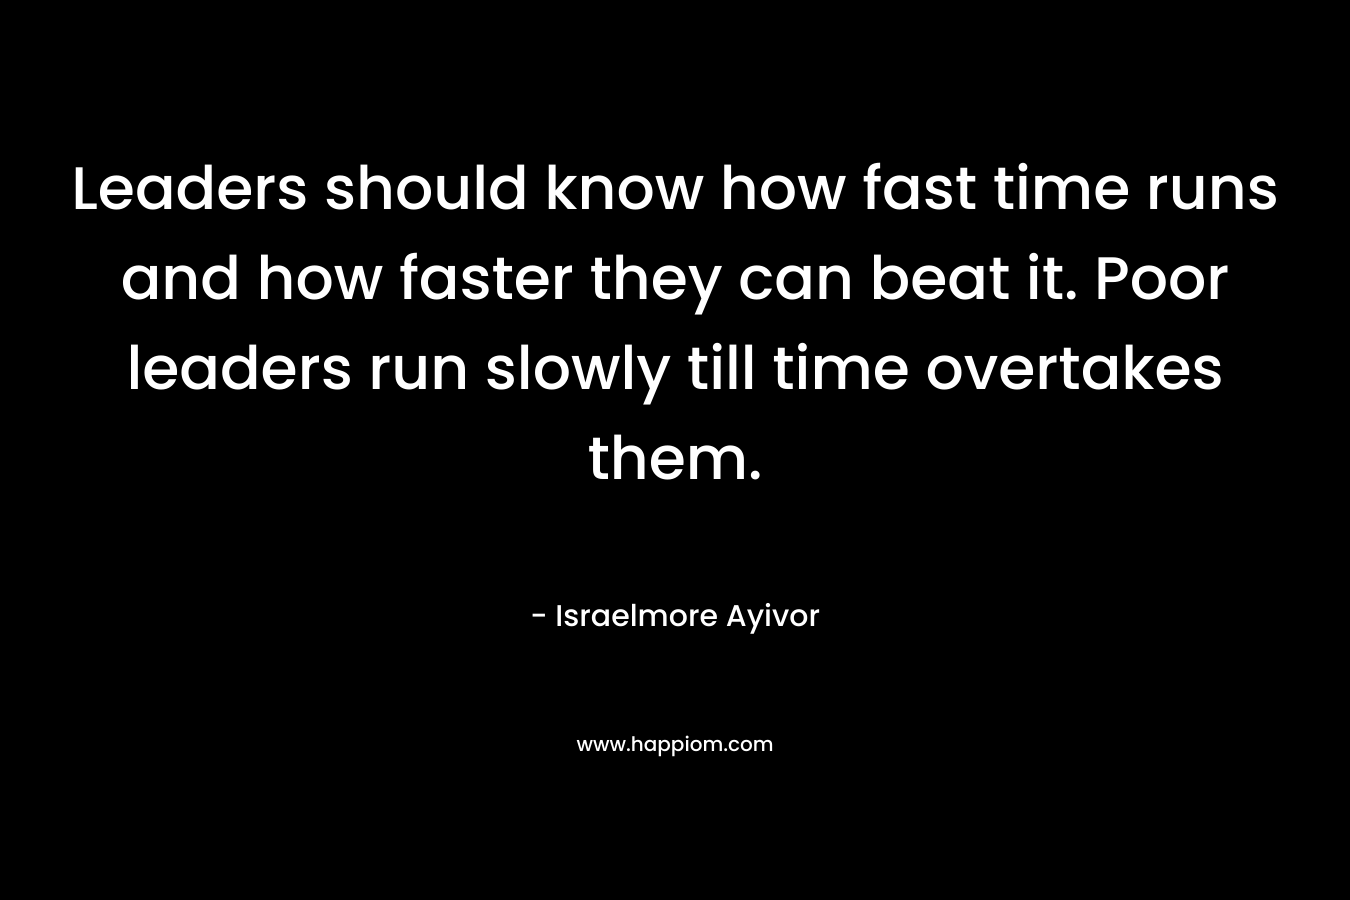 Leaders should know how fast time runs and how faster they can beat it. Poor leaders run slowly till time overtakes them.